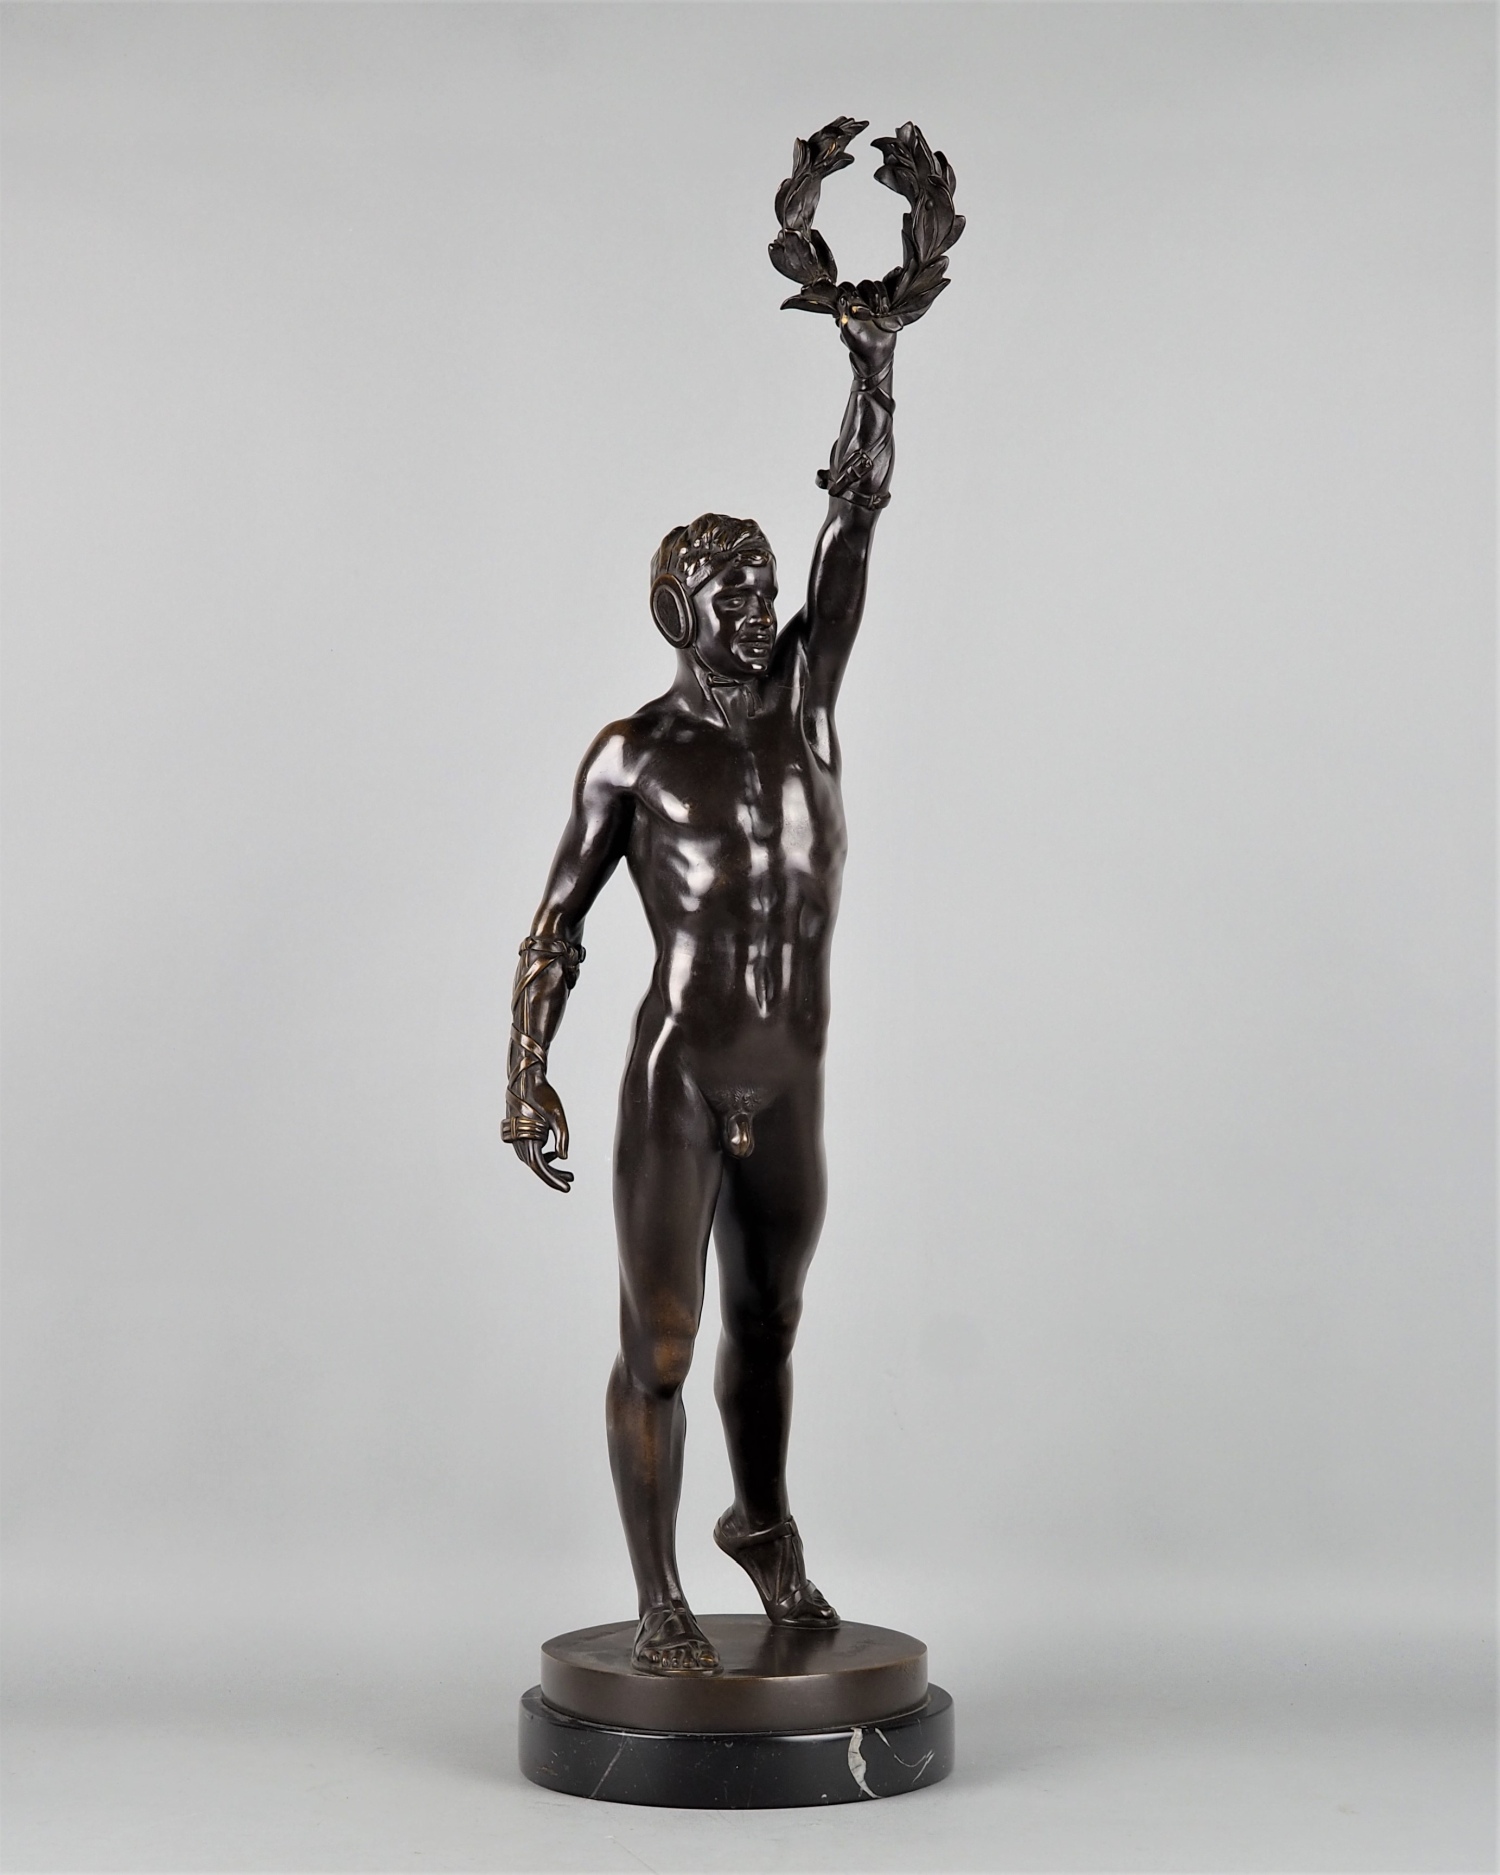 Large bronze of a victorious fist fighter by Heinrich Baucke around 1900, H. 66cm (26 in)